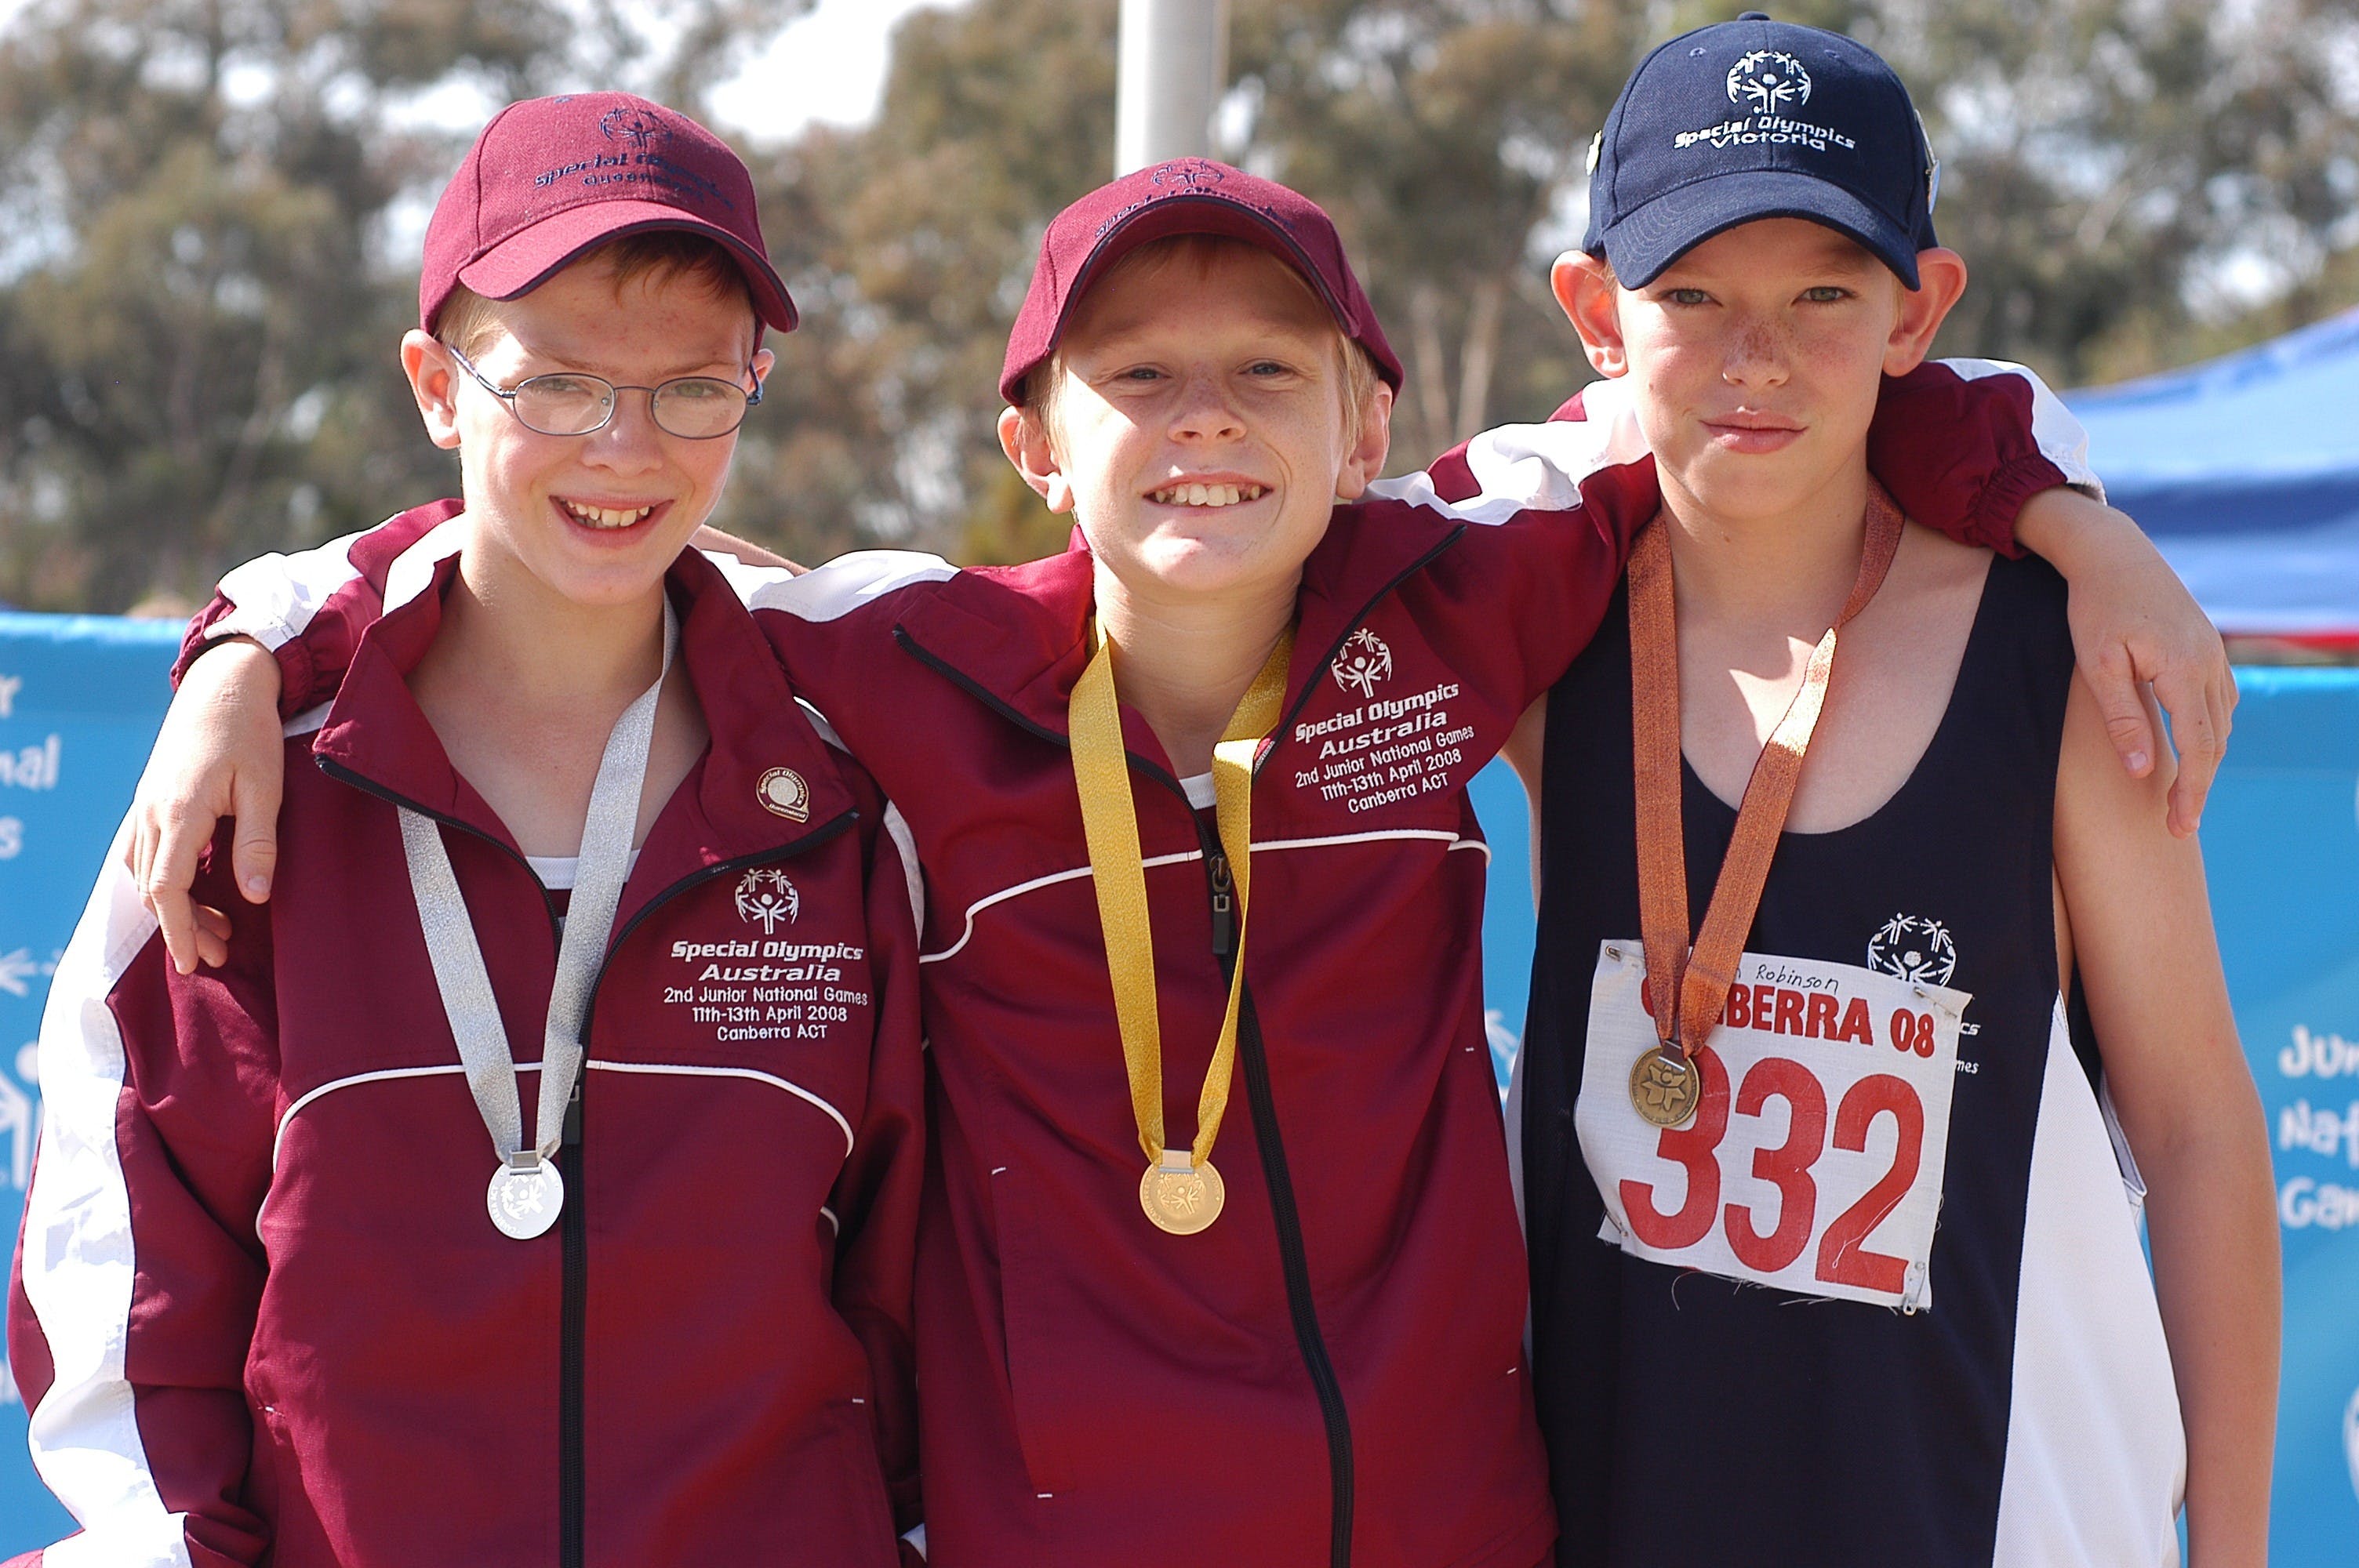 Special Olympics Australia Junior National Games 2021 - Townsville Tourism